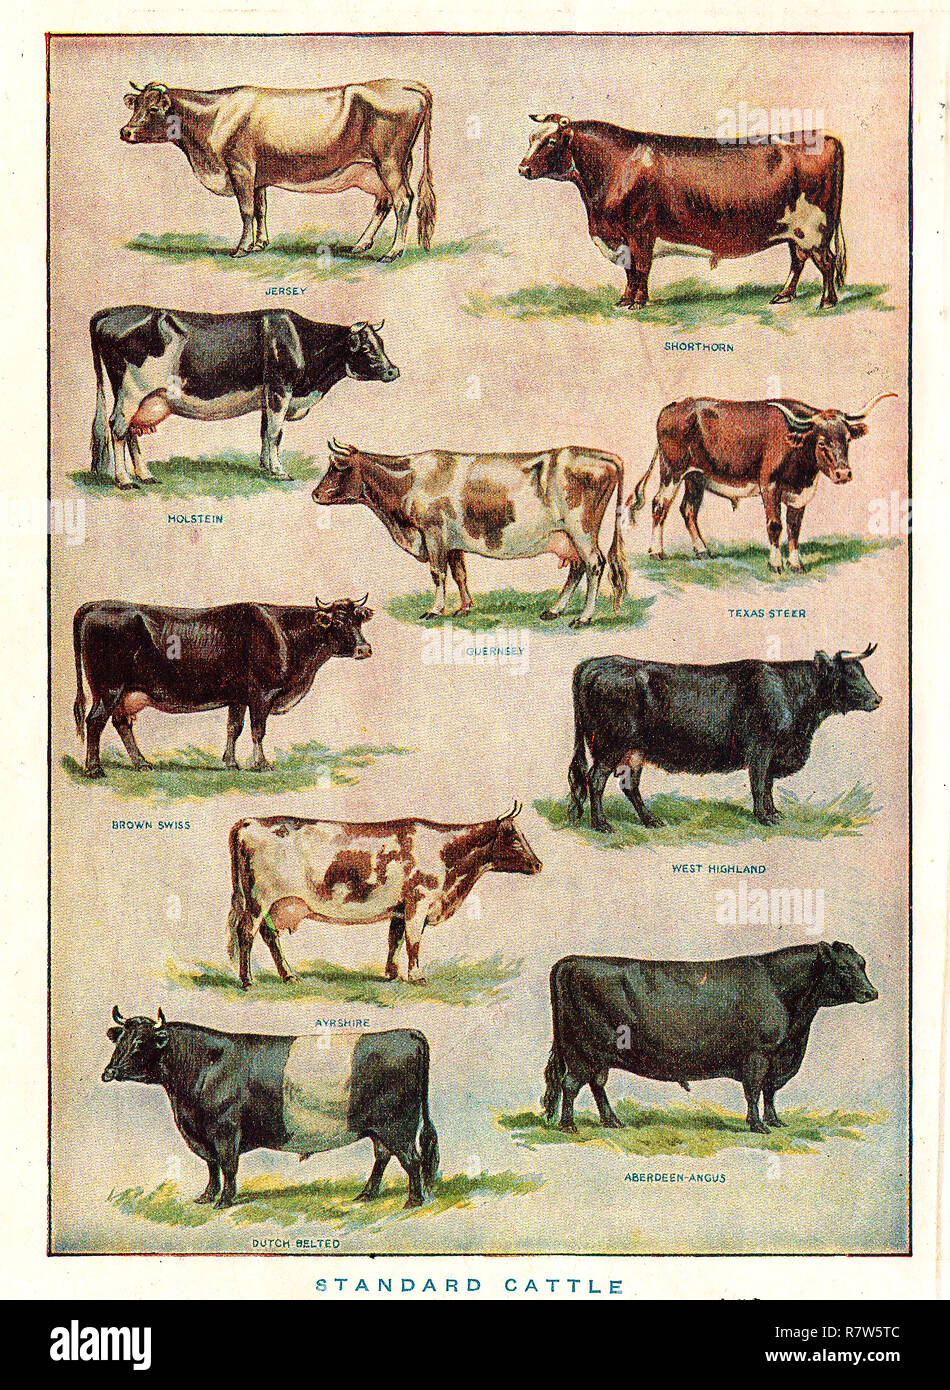 A 1924 coloured English  illustration showing various breeds of cattle Stock Photo